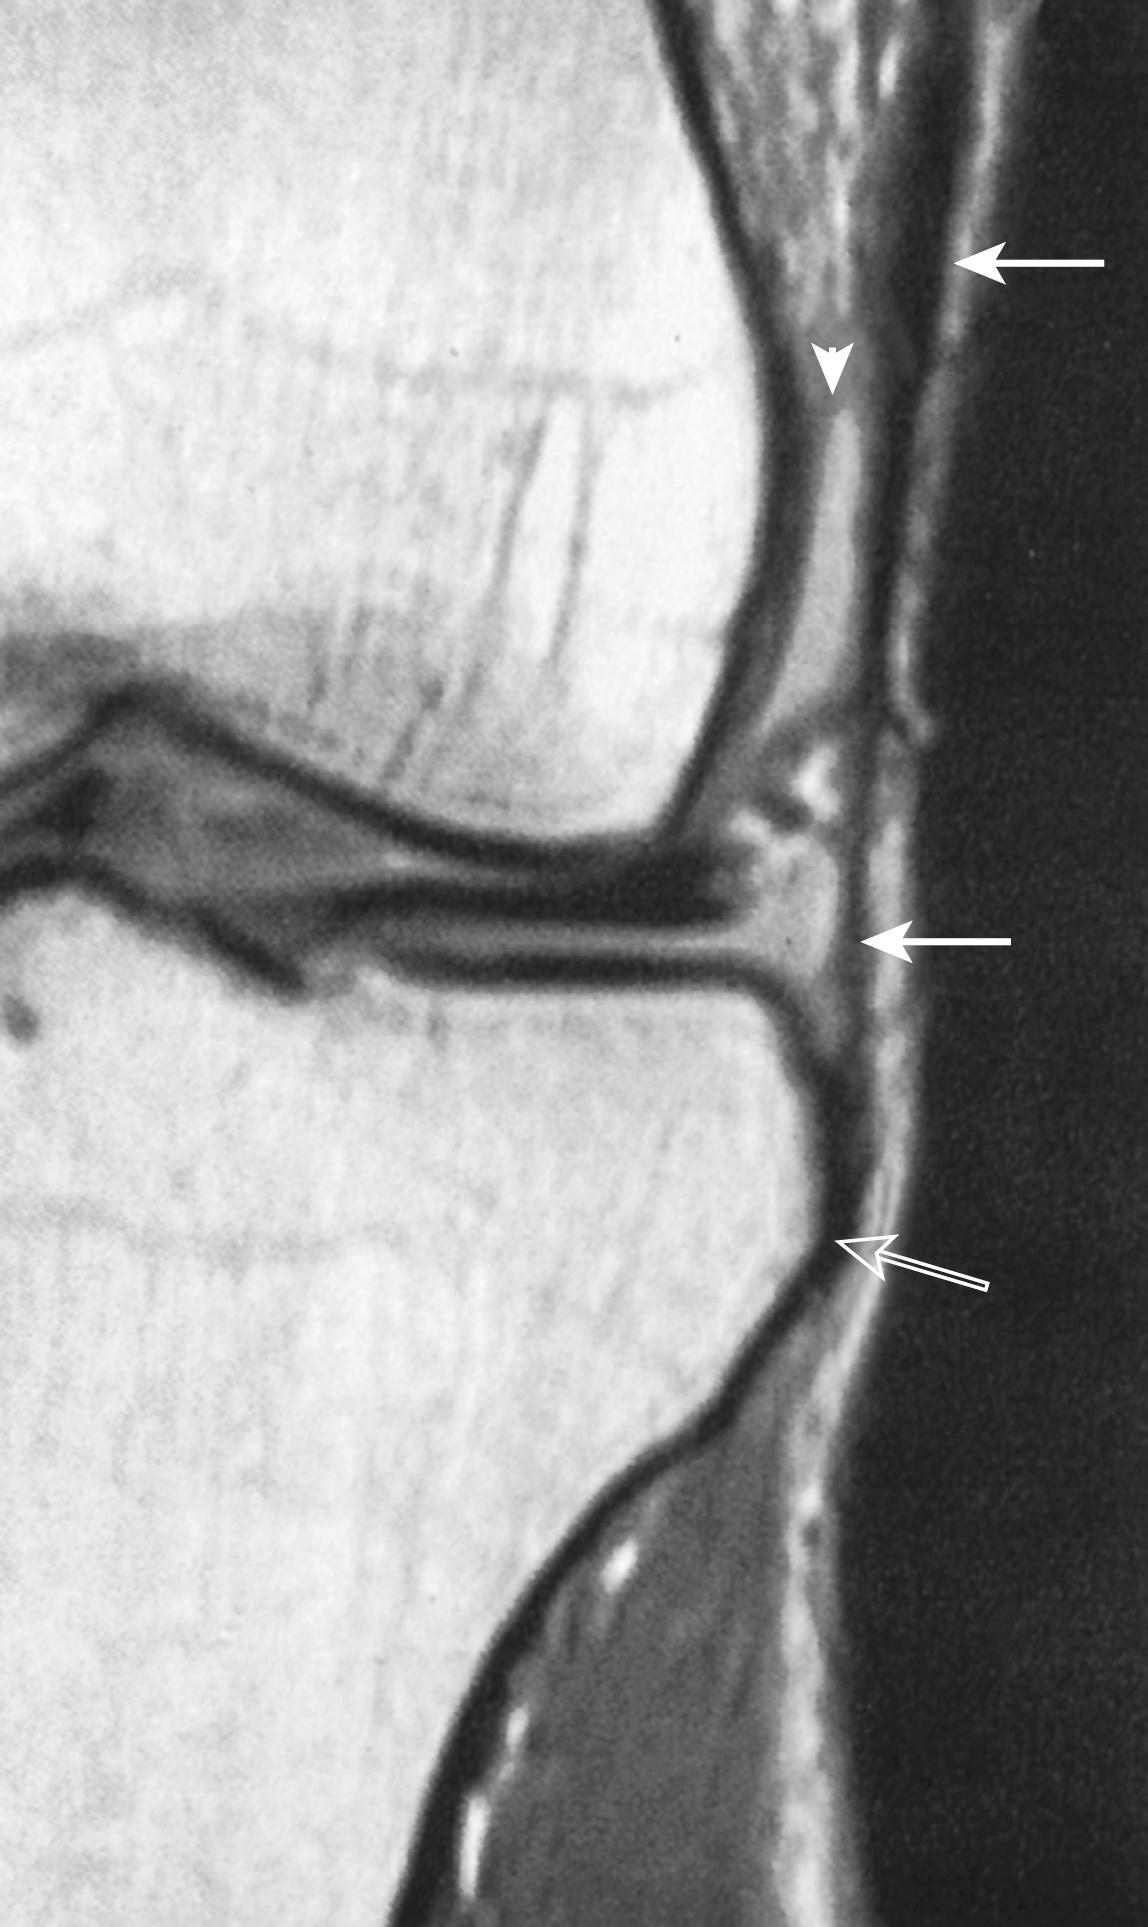 FIG. 164.4, Normal iliotibial tract: magnetic resonance (MR) imaging. A coronal intermediate-weighted (repetition time/echo time, 2000/20) spin-echo MR image shows the iliotibial tract (solid arrows) attaching to the Gerdy tubercle (open arrow) in the tibia. A small joint effusion is evident just medial to the iliotibial tract (arrowhead).